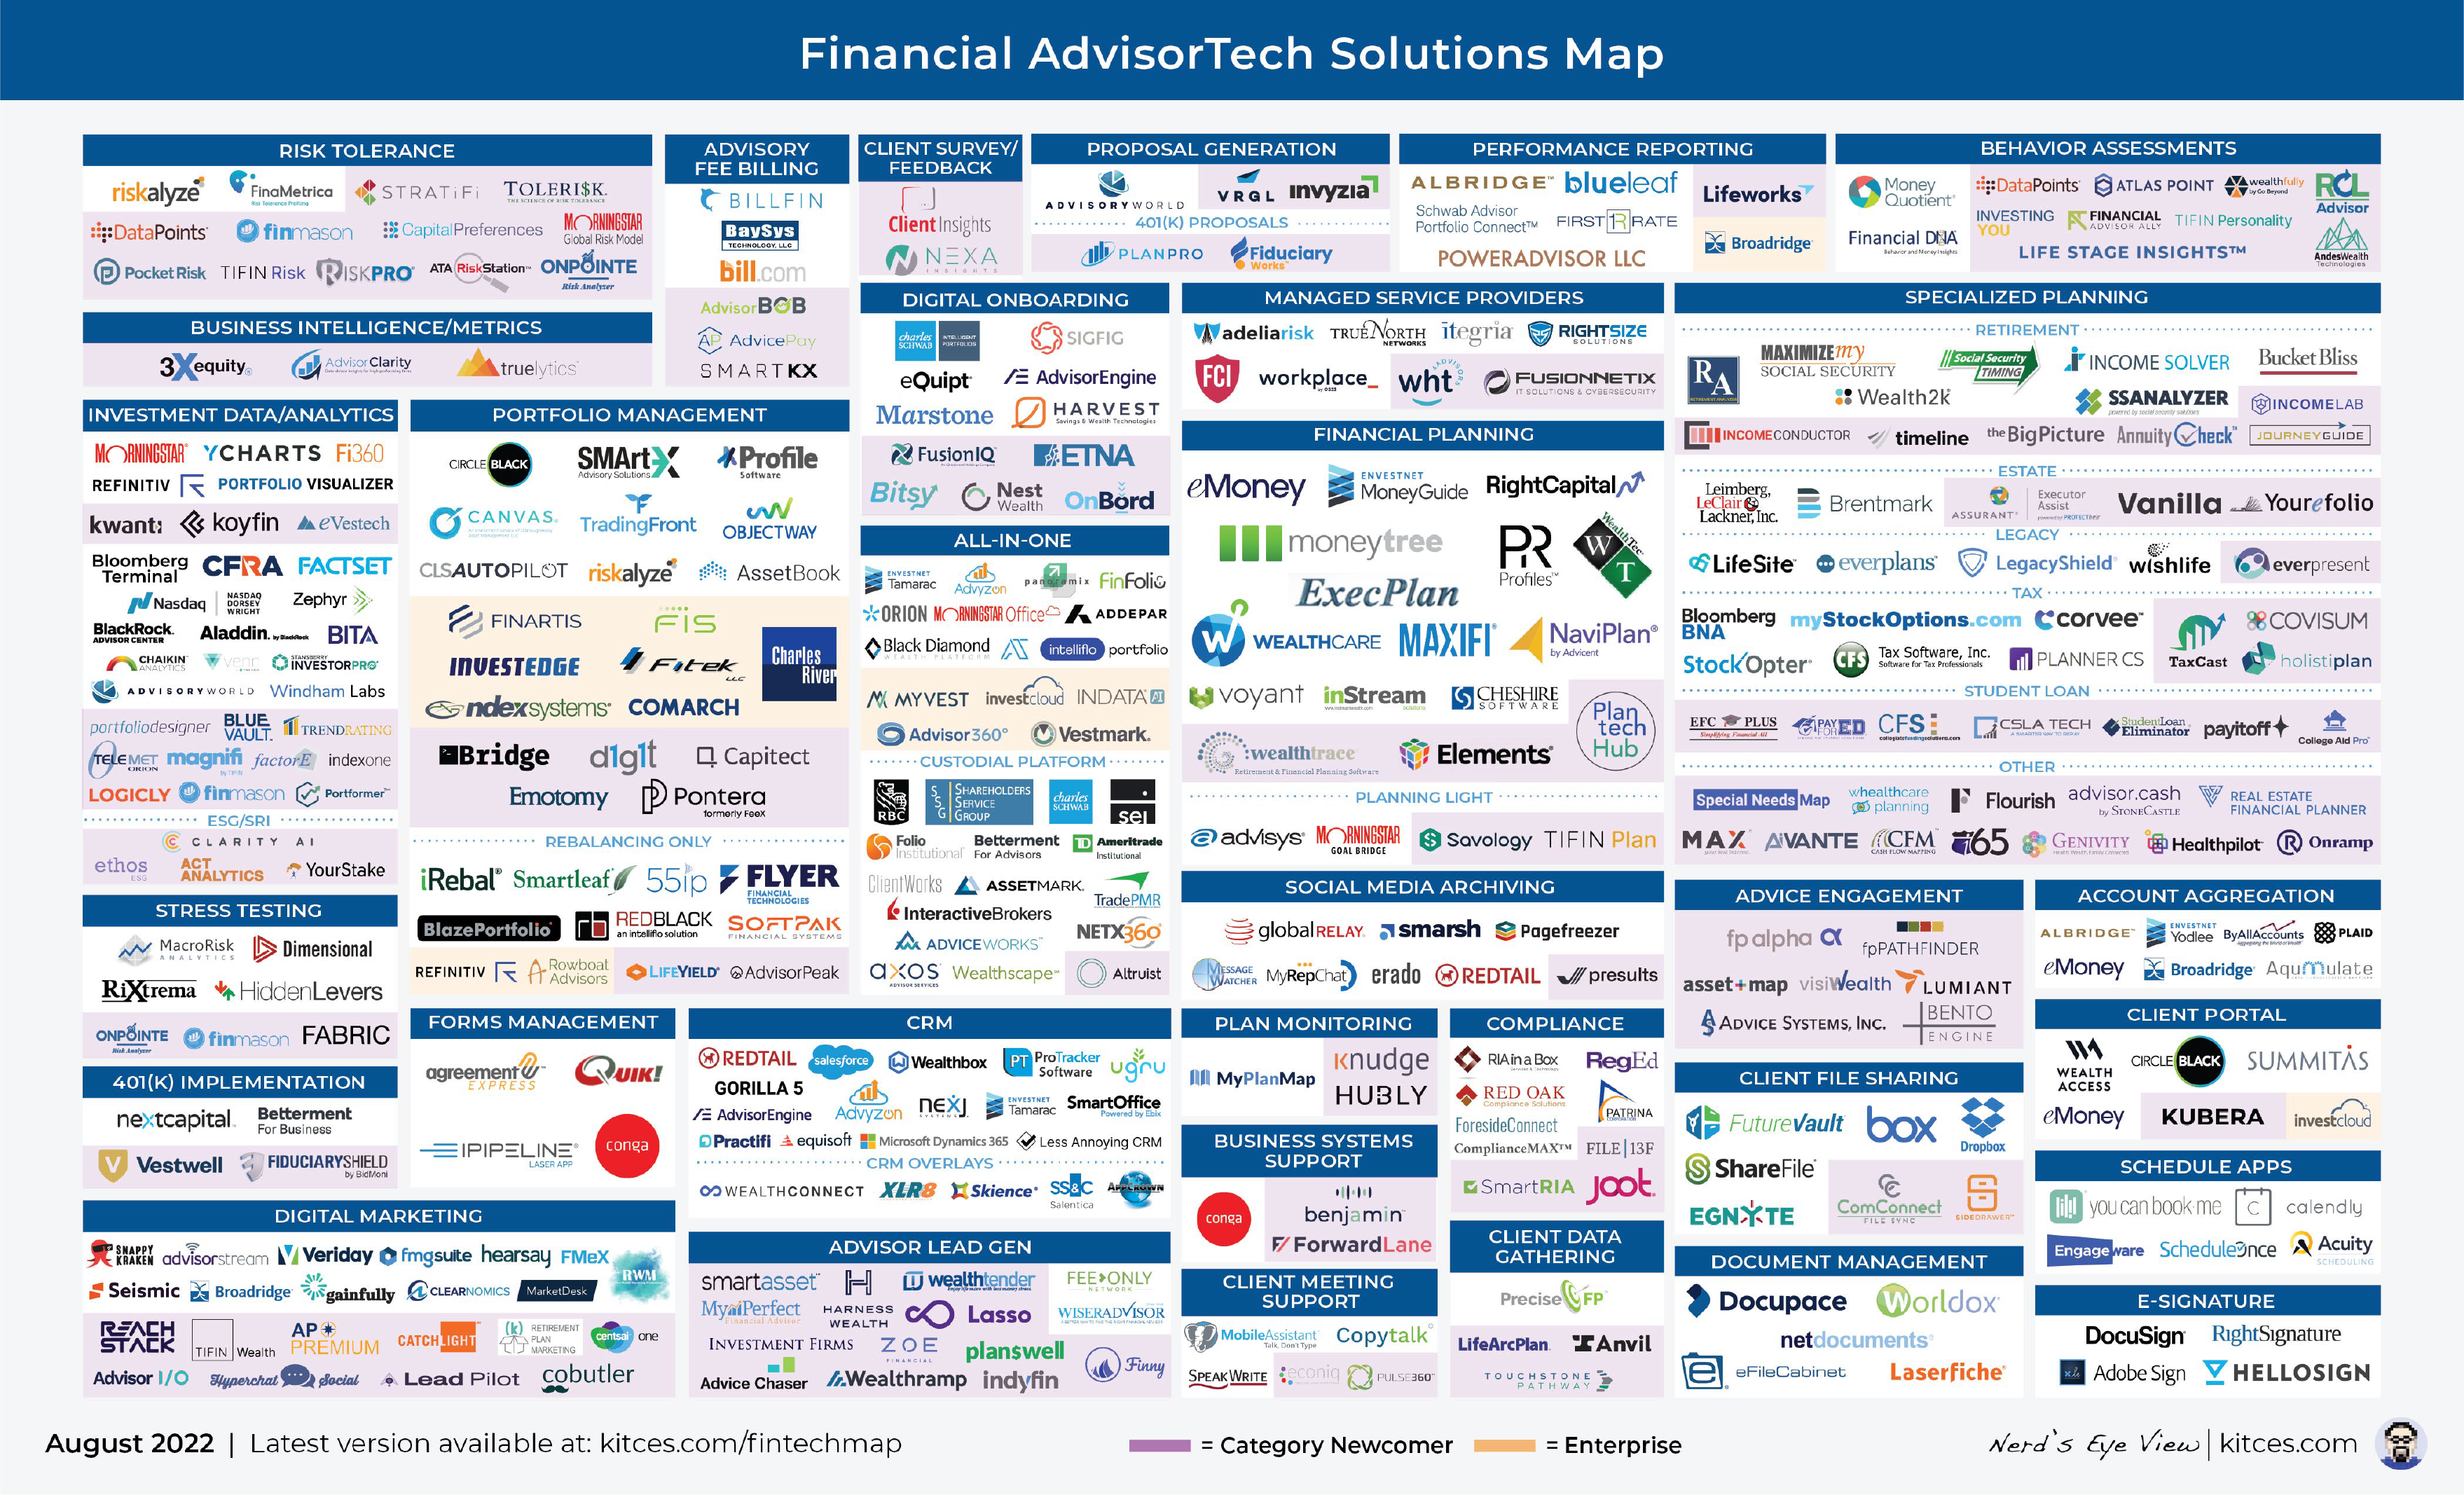 The Latest In Financial #AdvisorTech (August 2022)